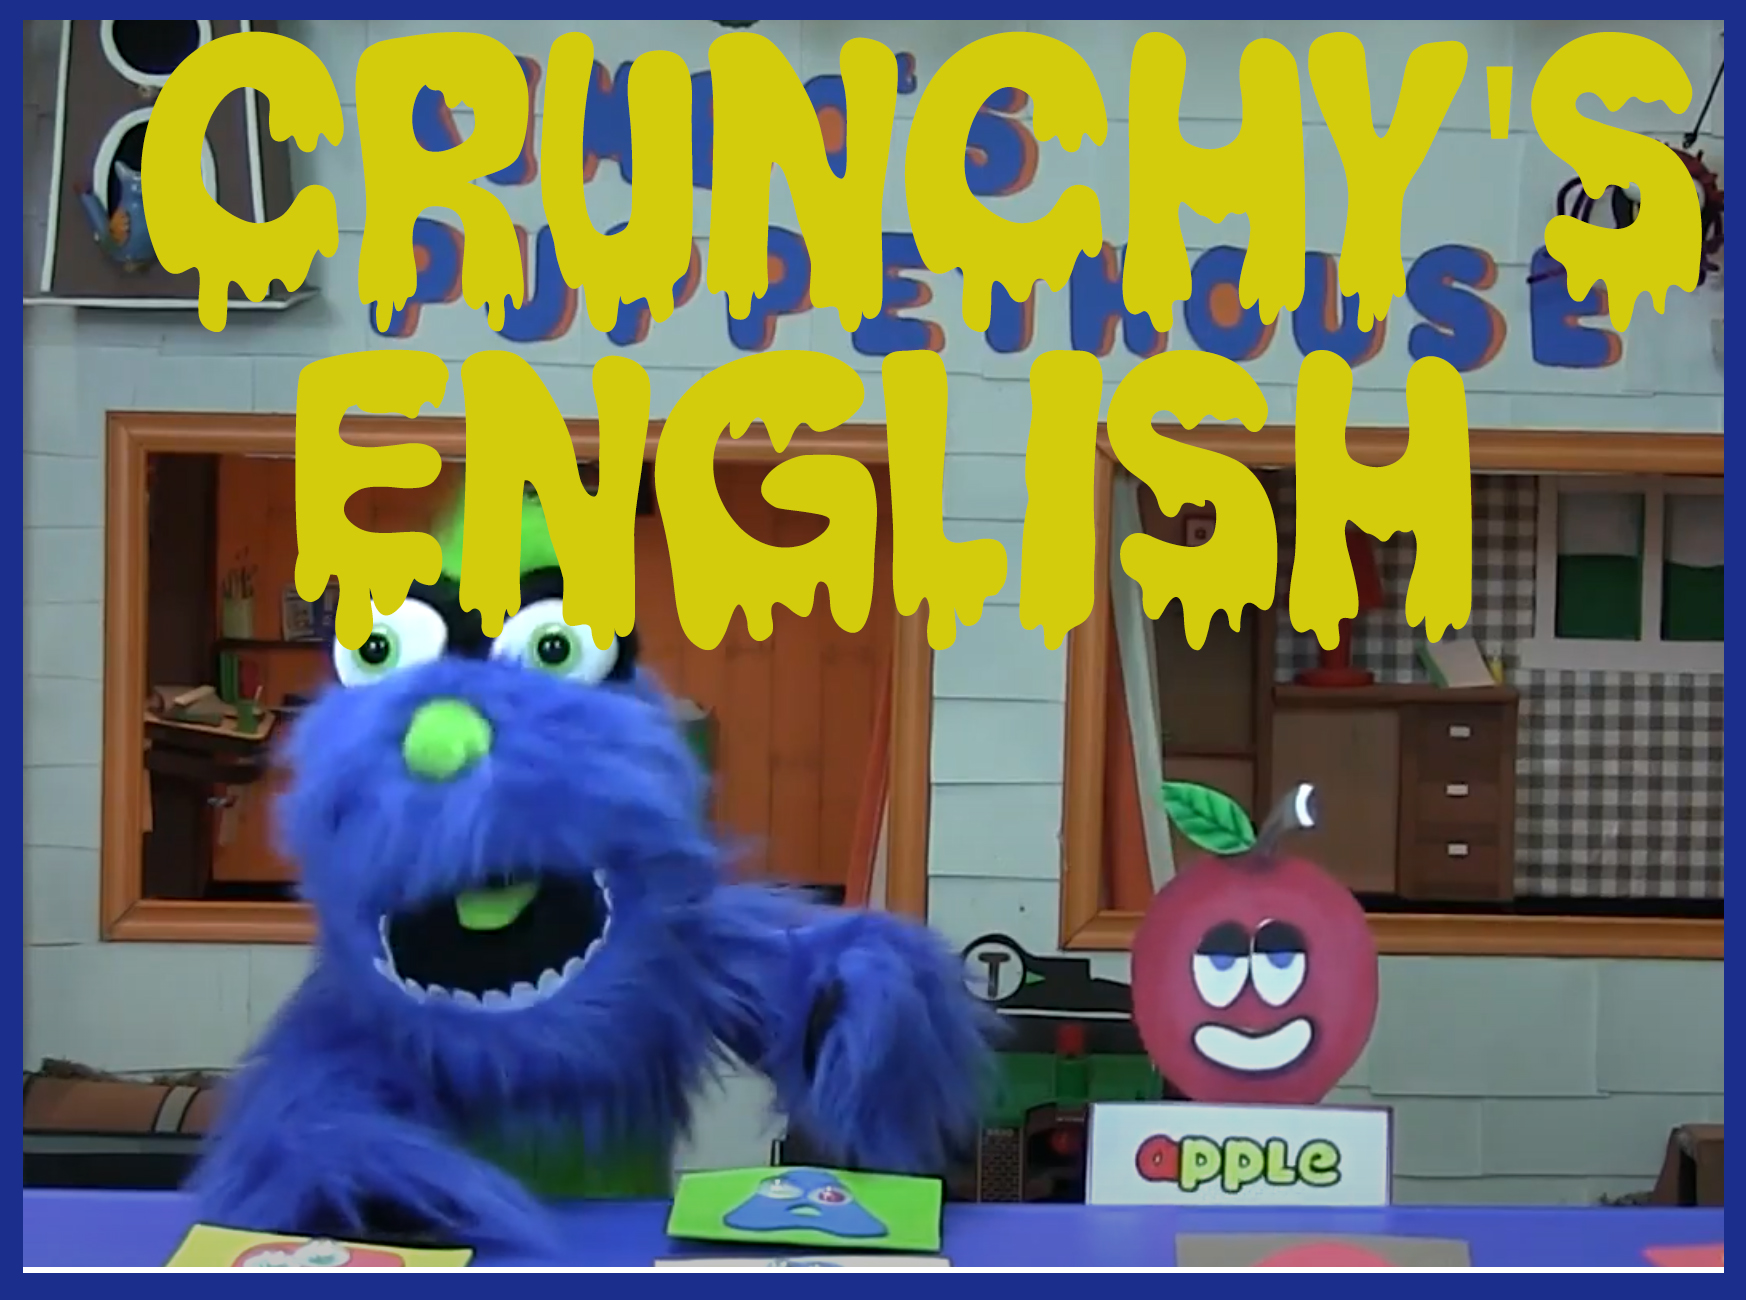 Welcome to the fun world of Crunchy!